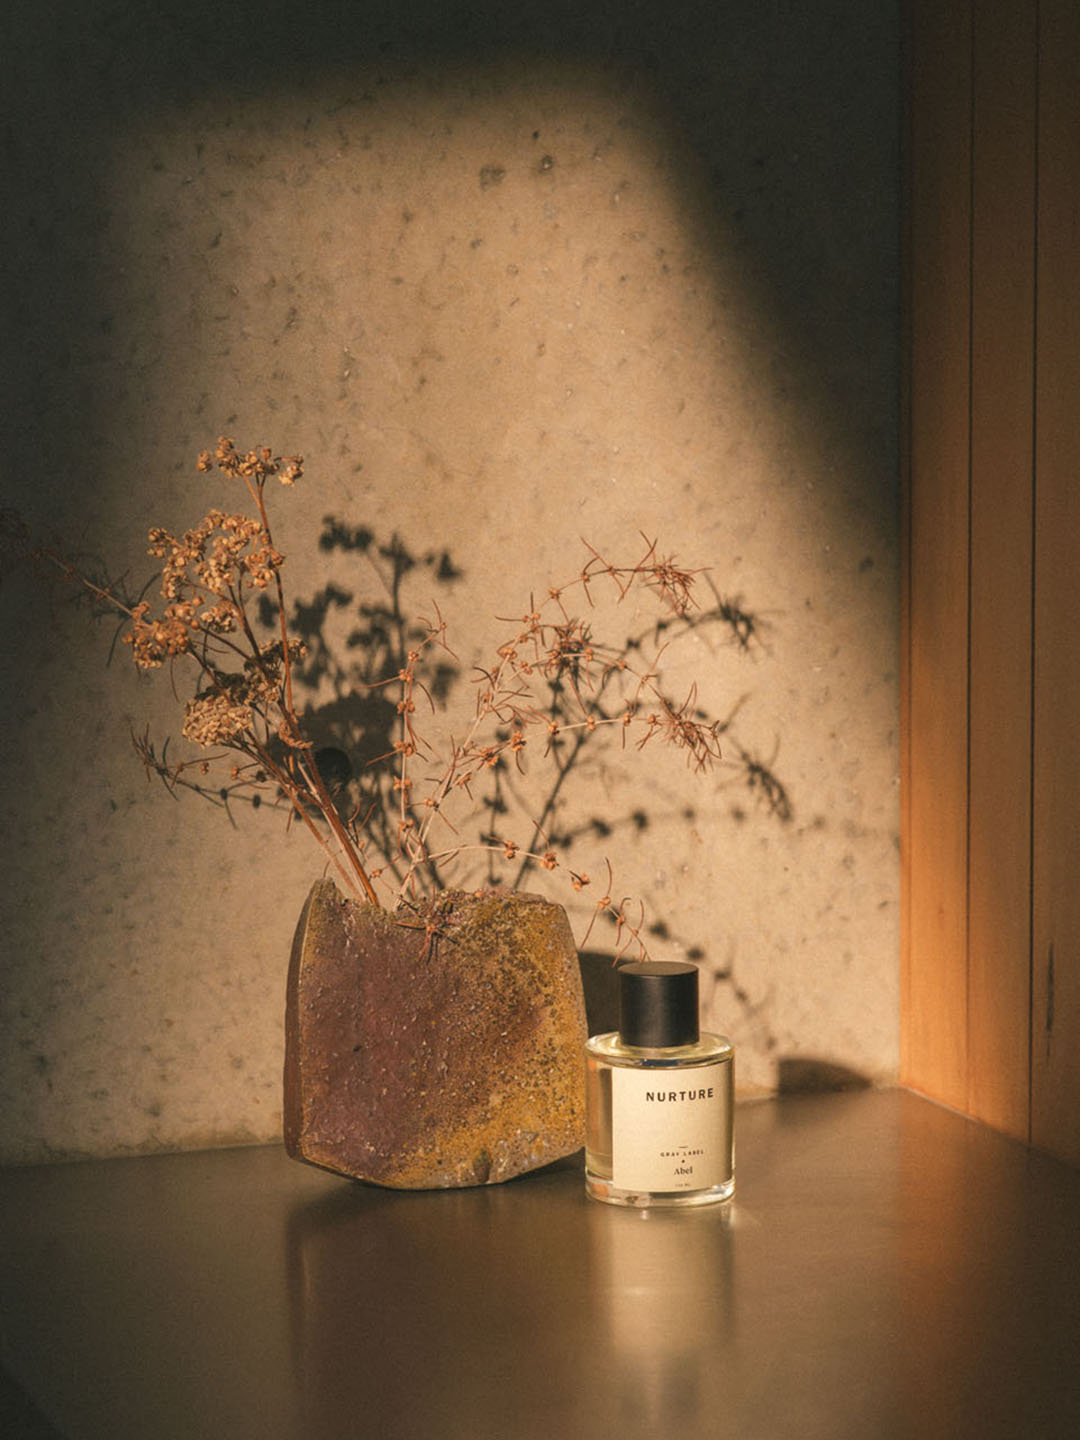 An NURTURE - grey label fragrance bottle sits on a table next to a plant by Abel.